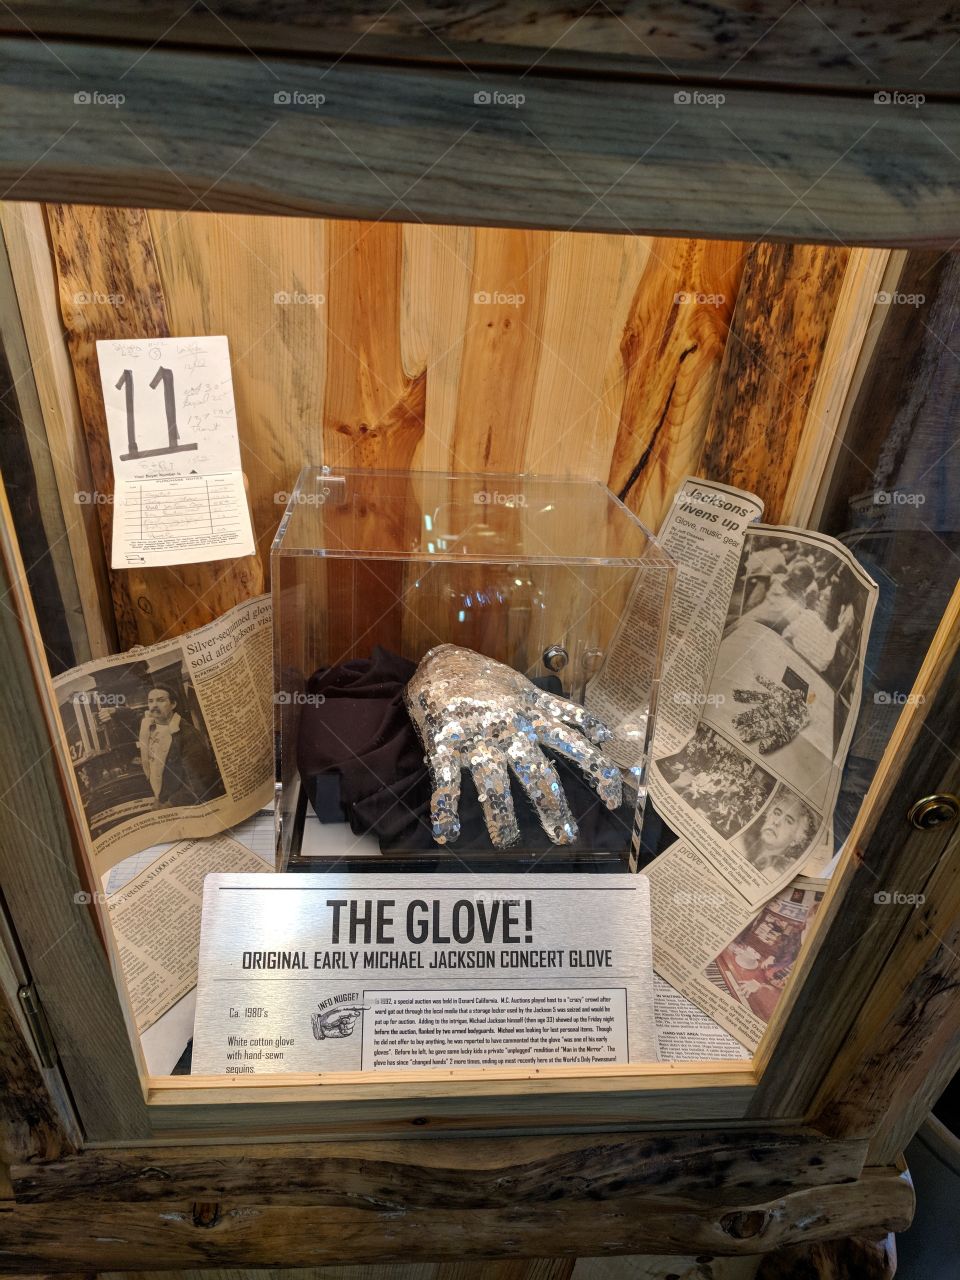 Famous, original, early concert, glove worn by Michael Jackson. Seen at the "Pawnseum" in Rapid City, South Dakota.